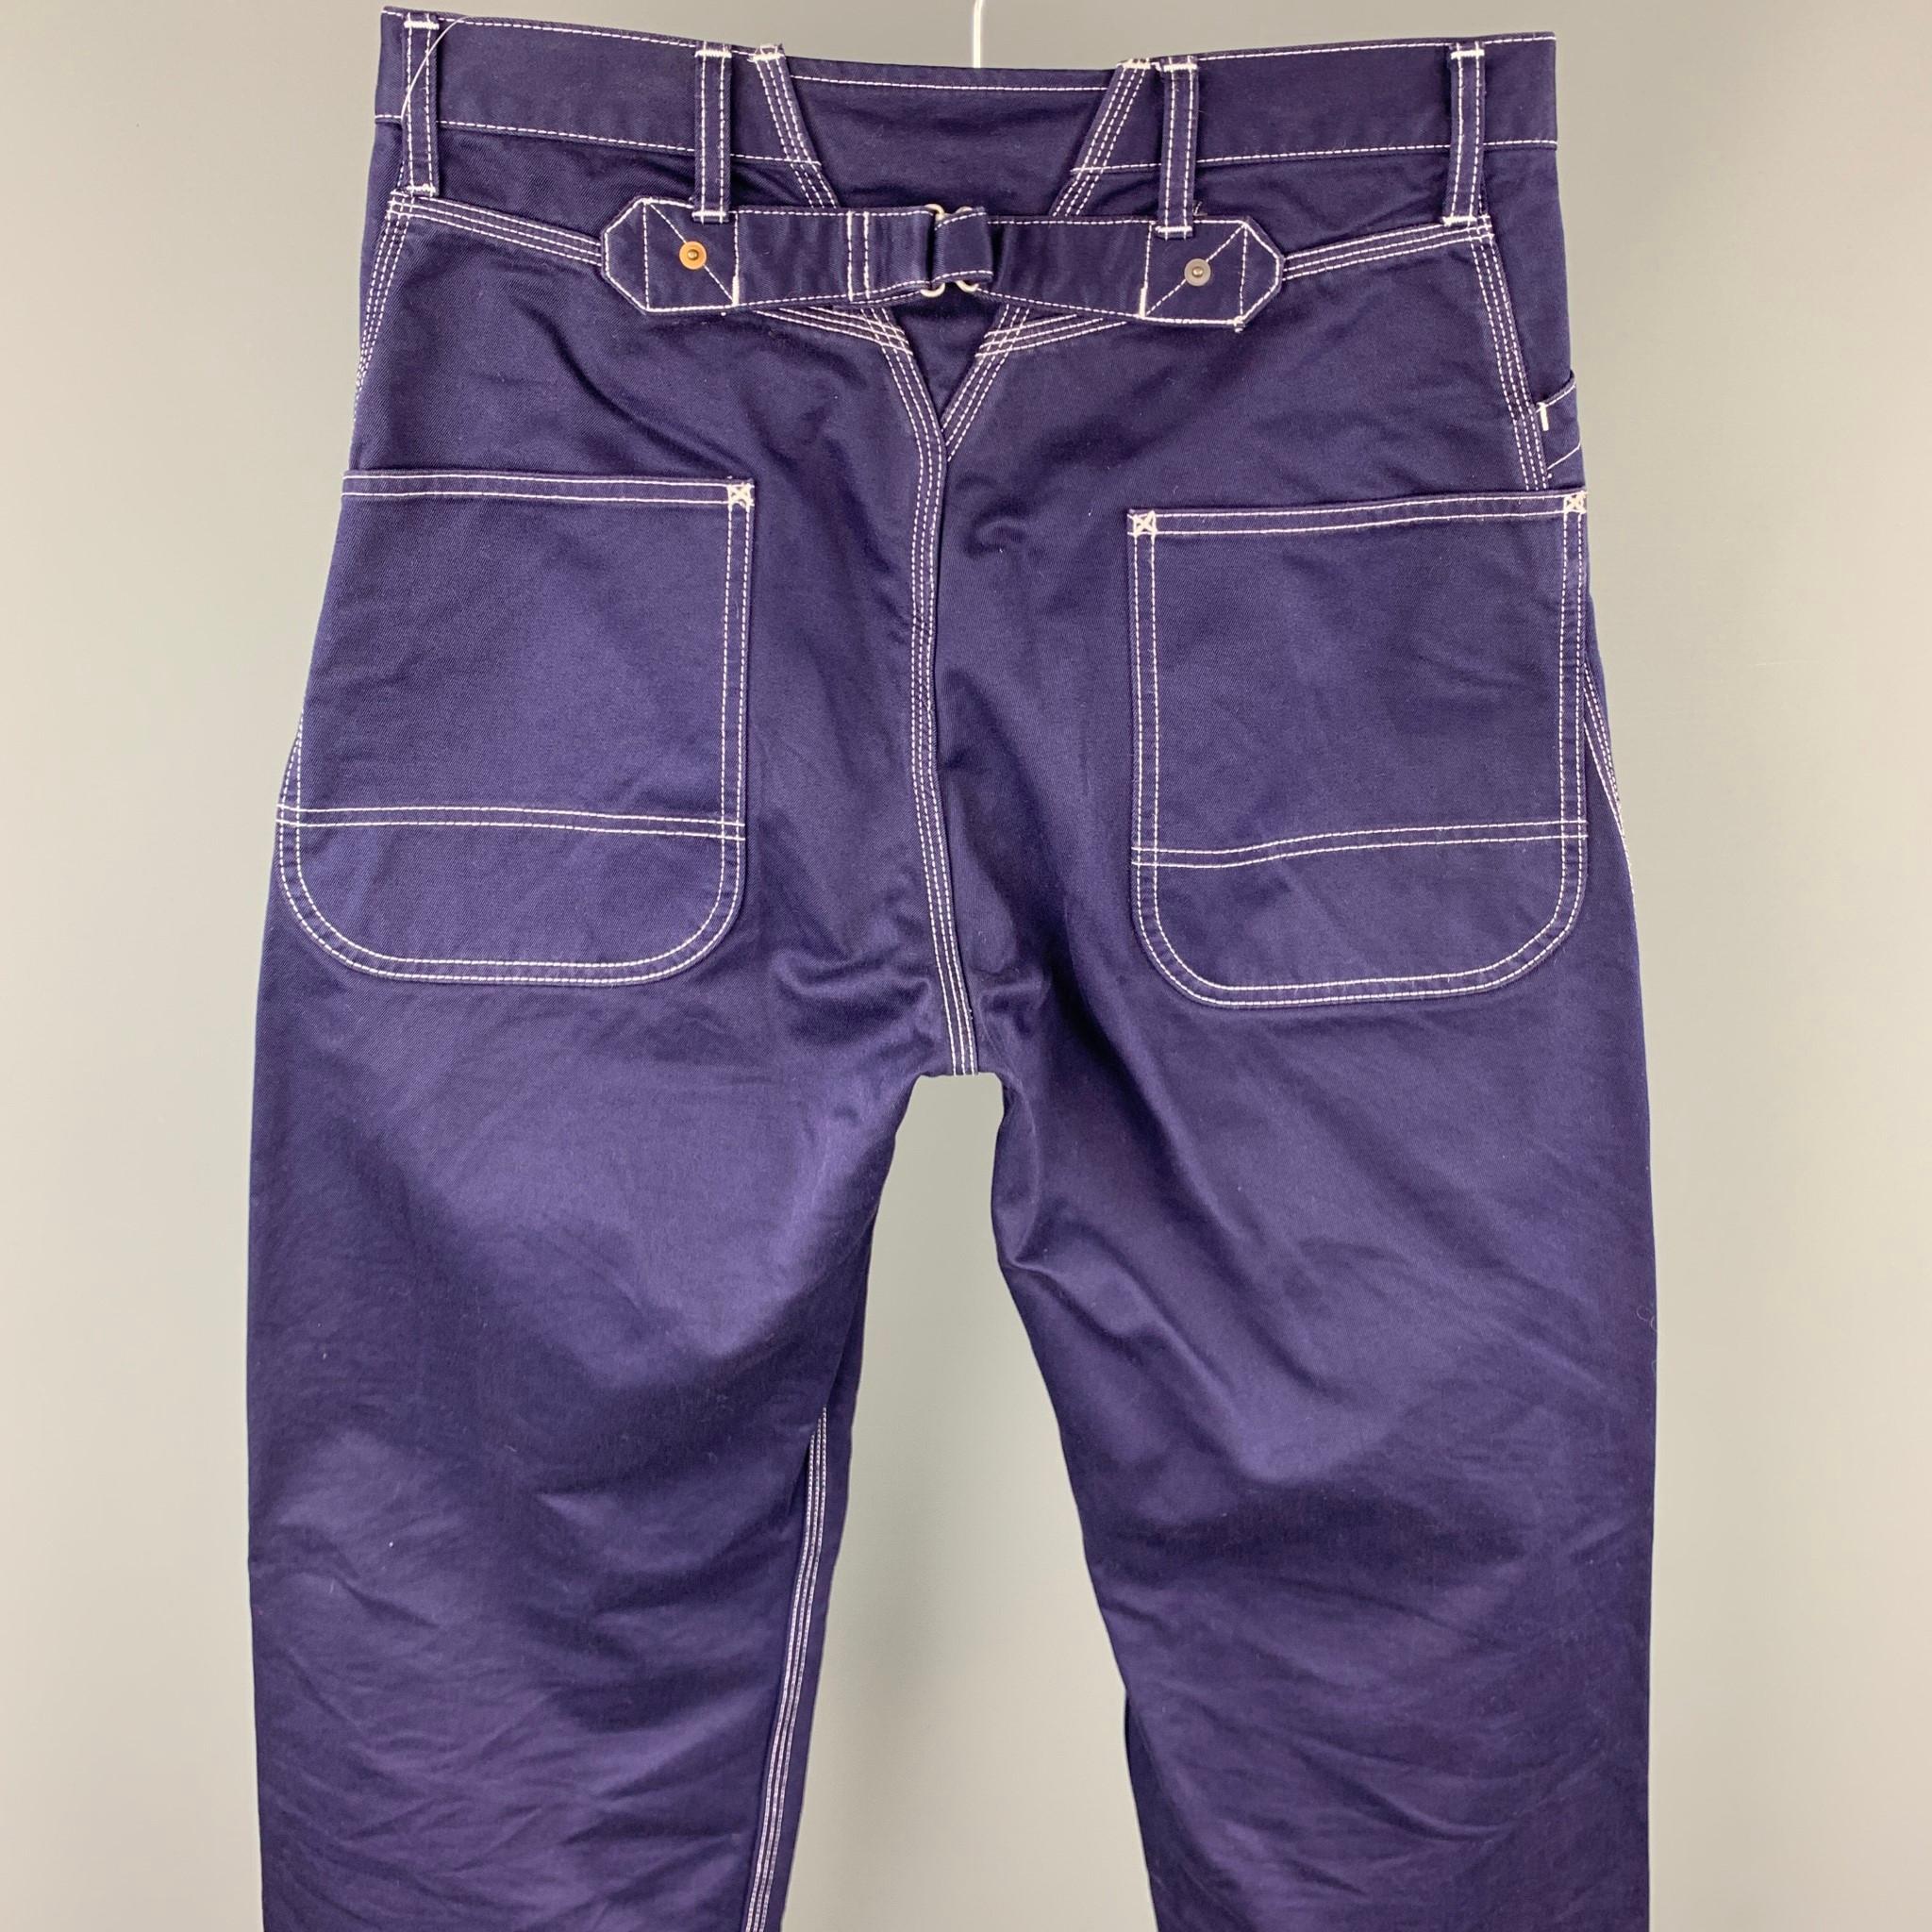 JUNYA WATANABE casual pants comes in a navy cotton with contrast stitching featuring a straight leg, back belt, and a zip fly closure. Made in Japan.

Very Good Pre-Owned Condition.
Marked: M  / AD2010

Measurements:

Waist: 32 in. 
Rise: 11 in.